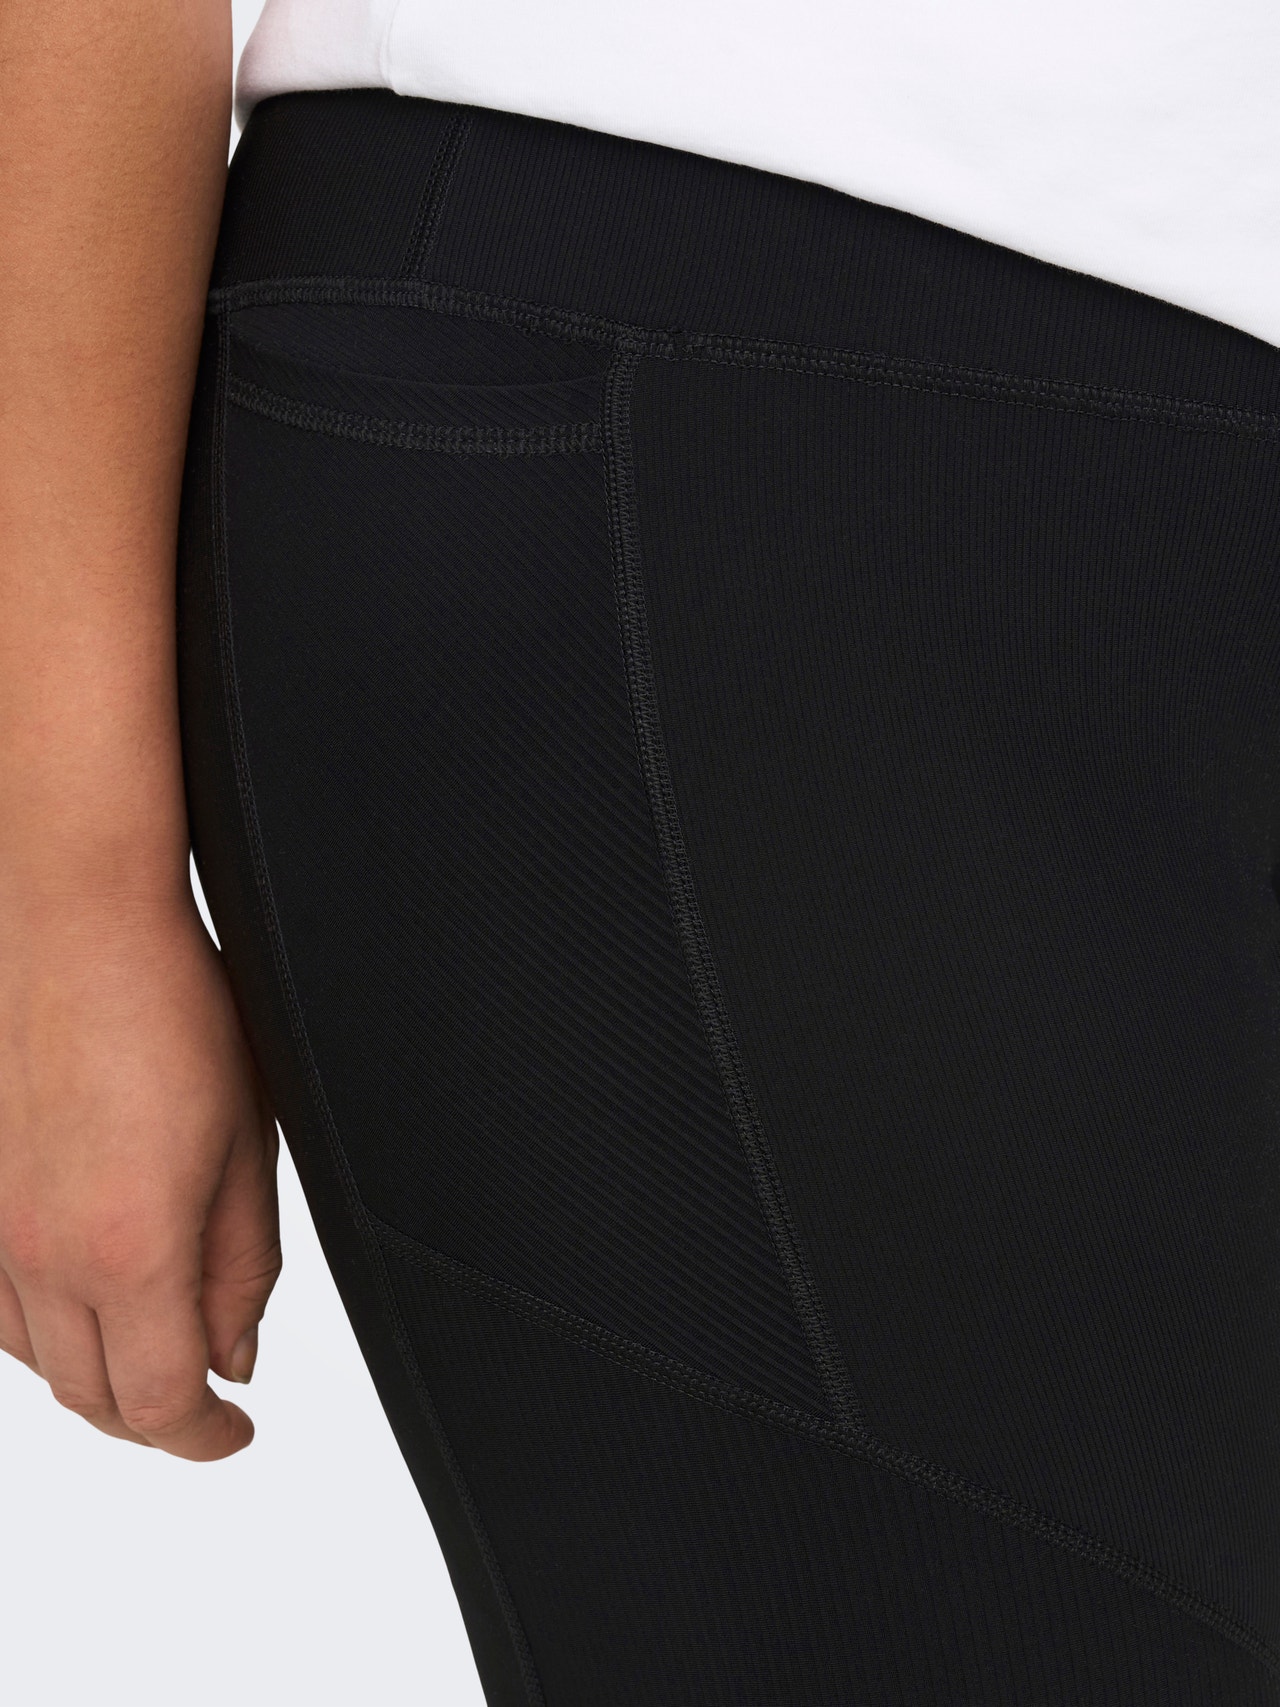 ONLY Tight Fit High waist Curve Leggings -Black - 15276824